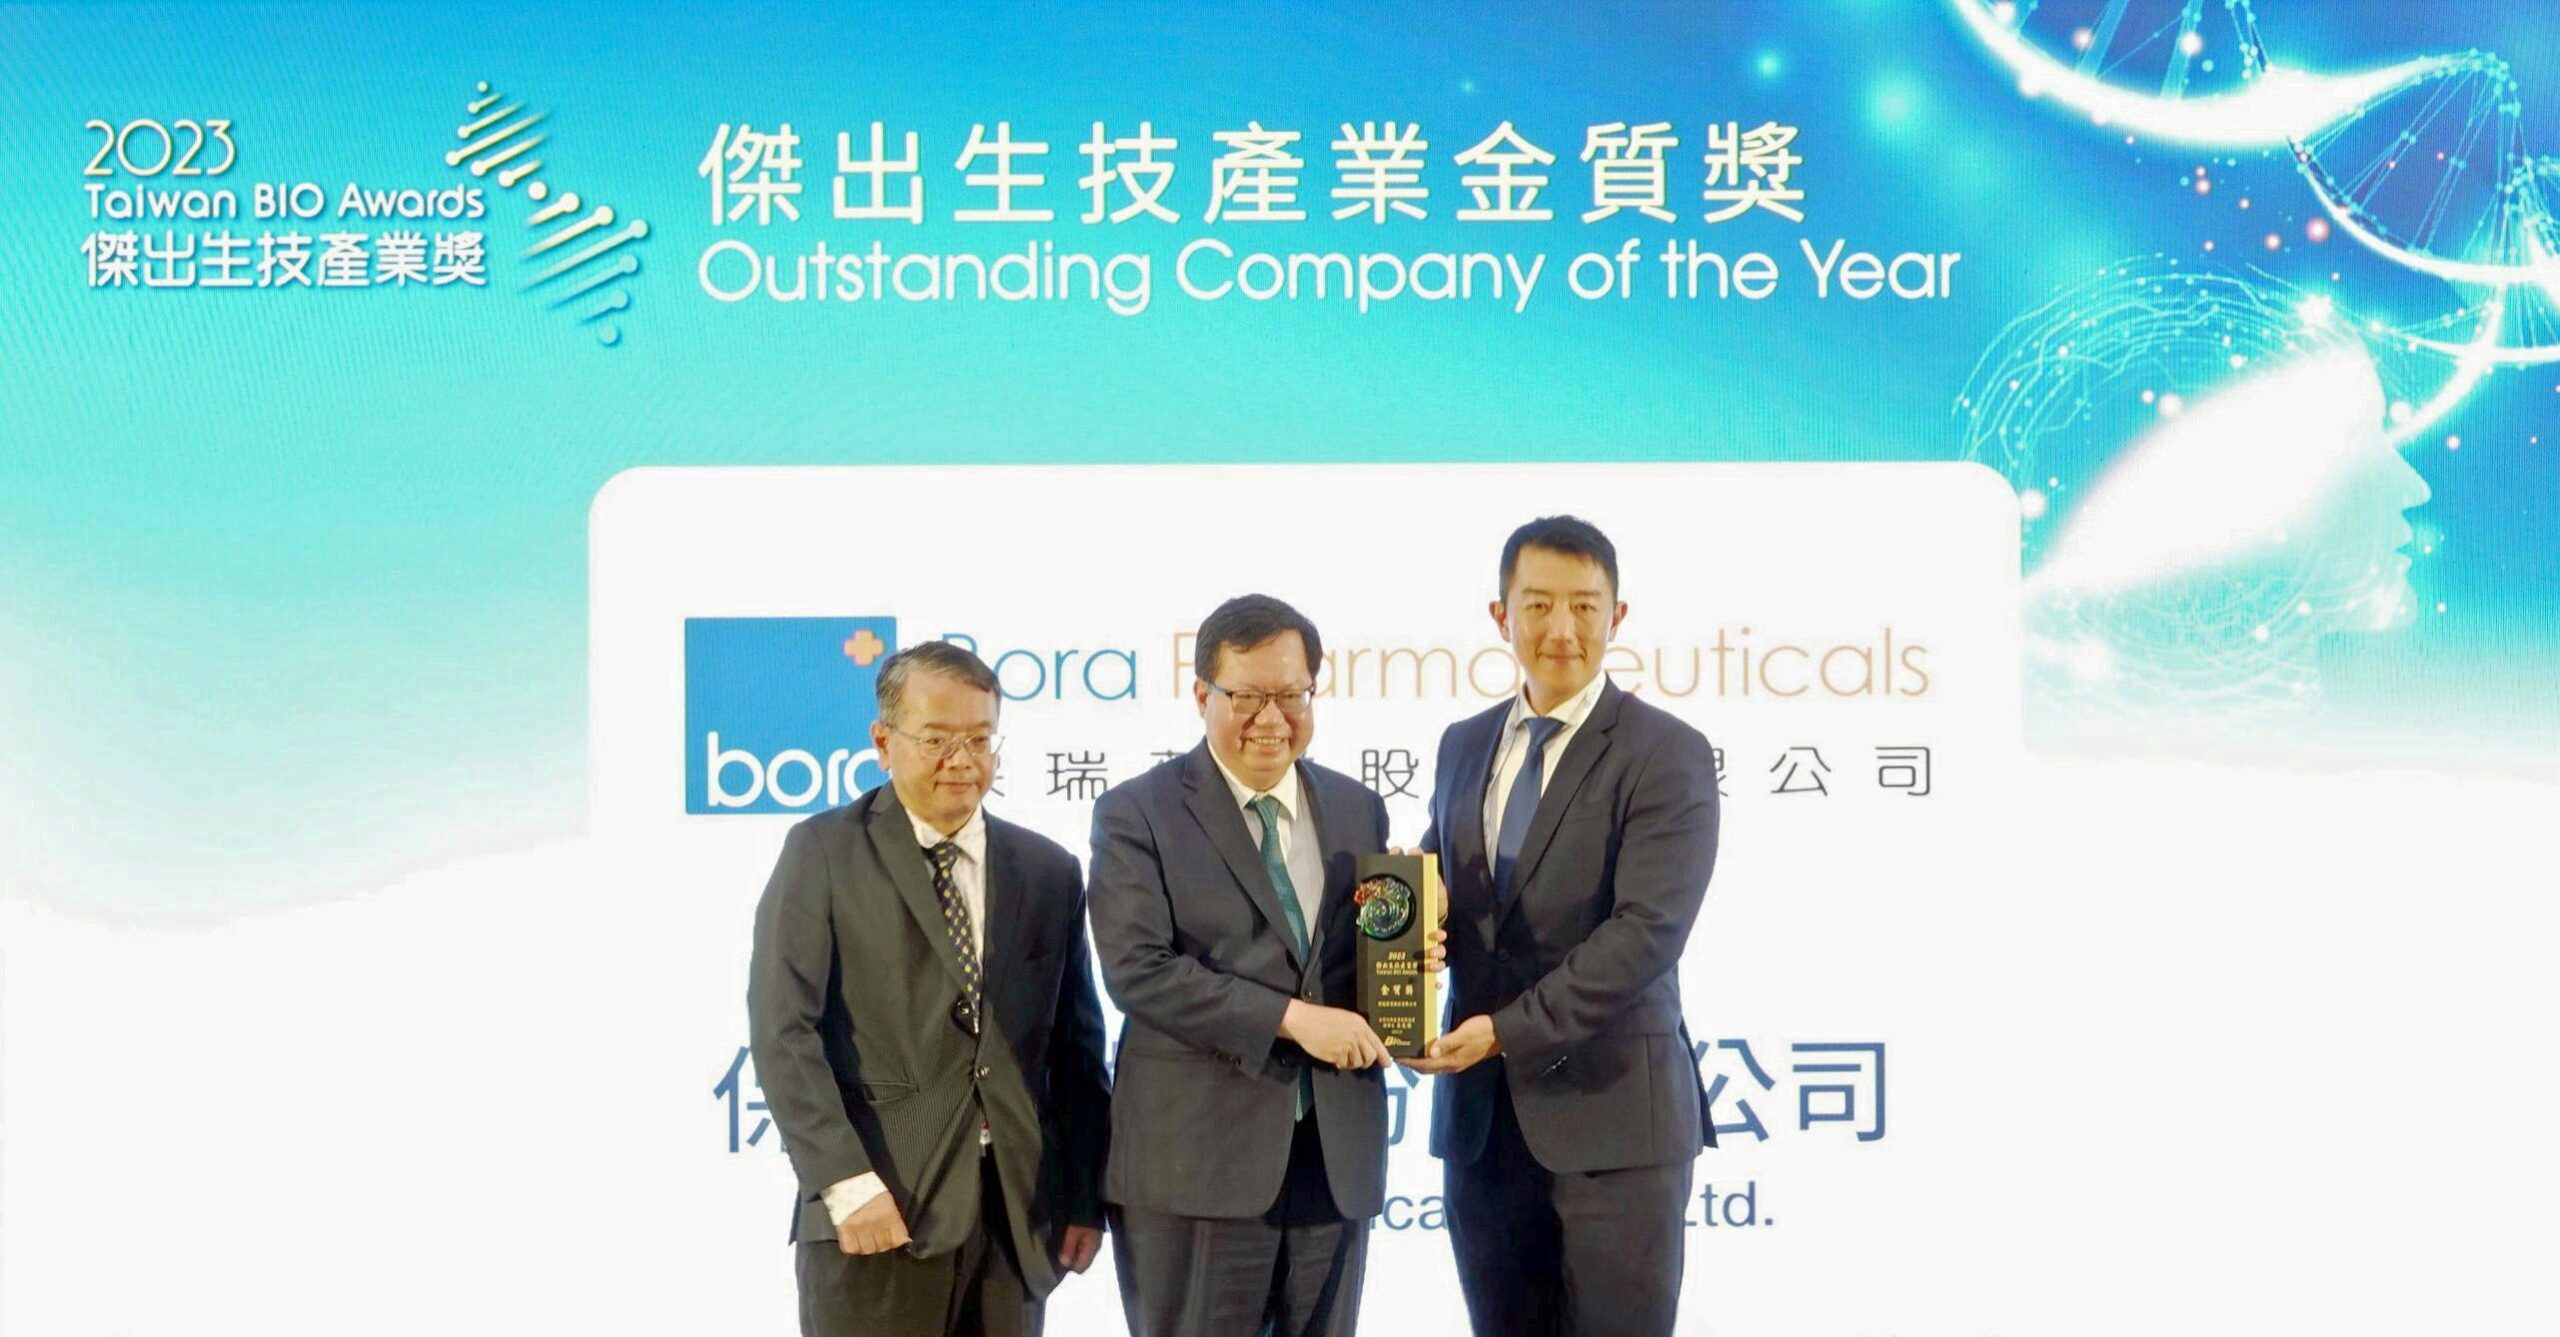 Bora Pharmaceuticals is Awarded Outstanding Company of the Year at Bio-Asia Taiwan 2023